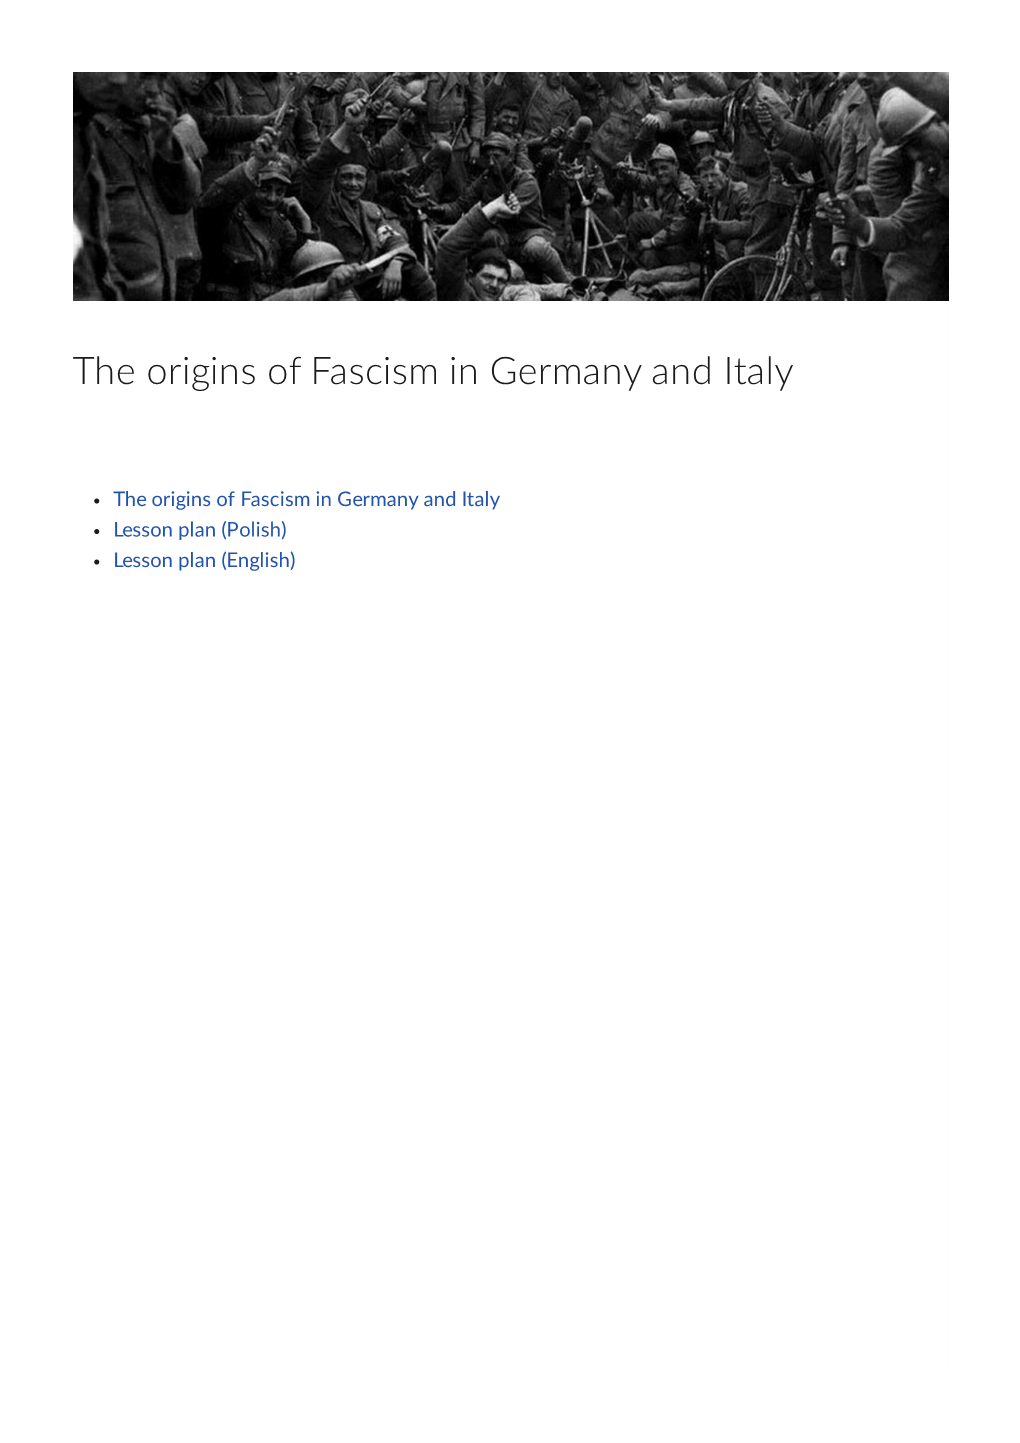 The Origins of Fascism in Germany and Italy